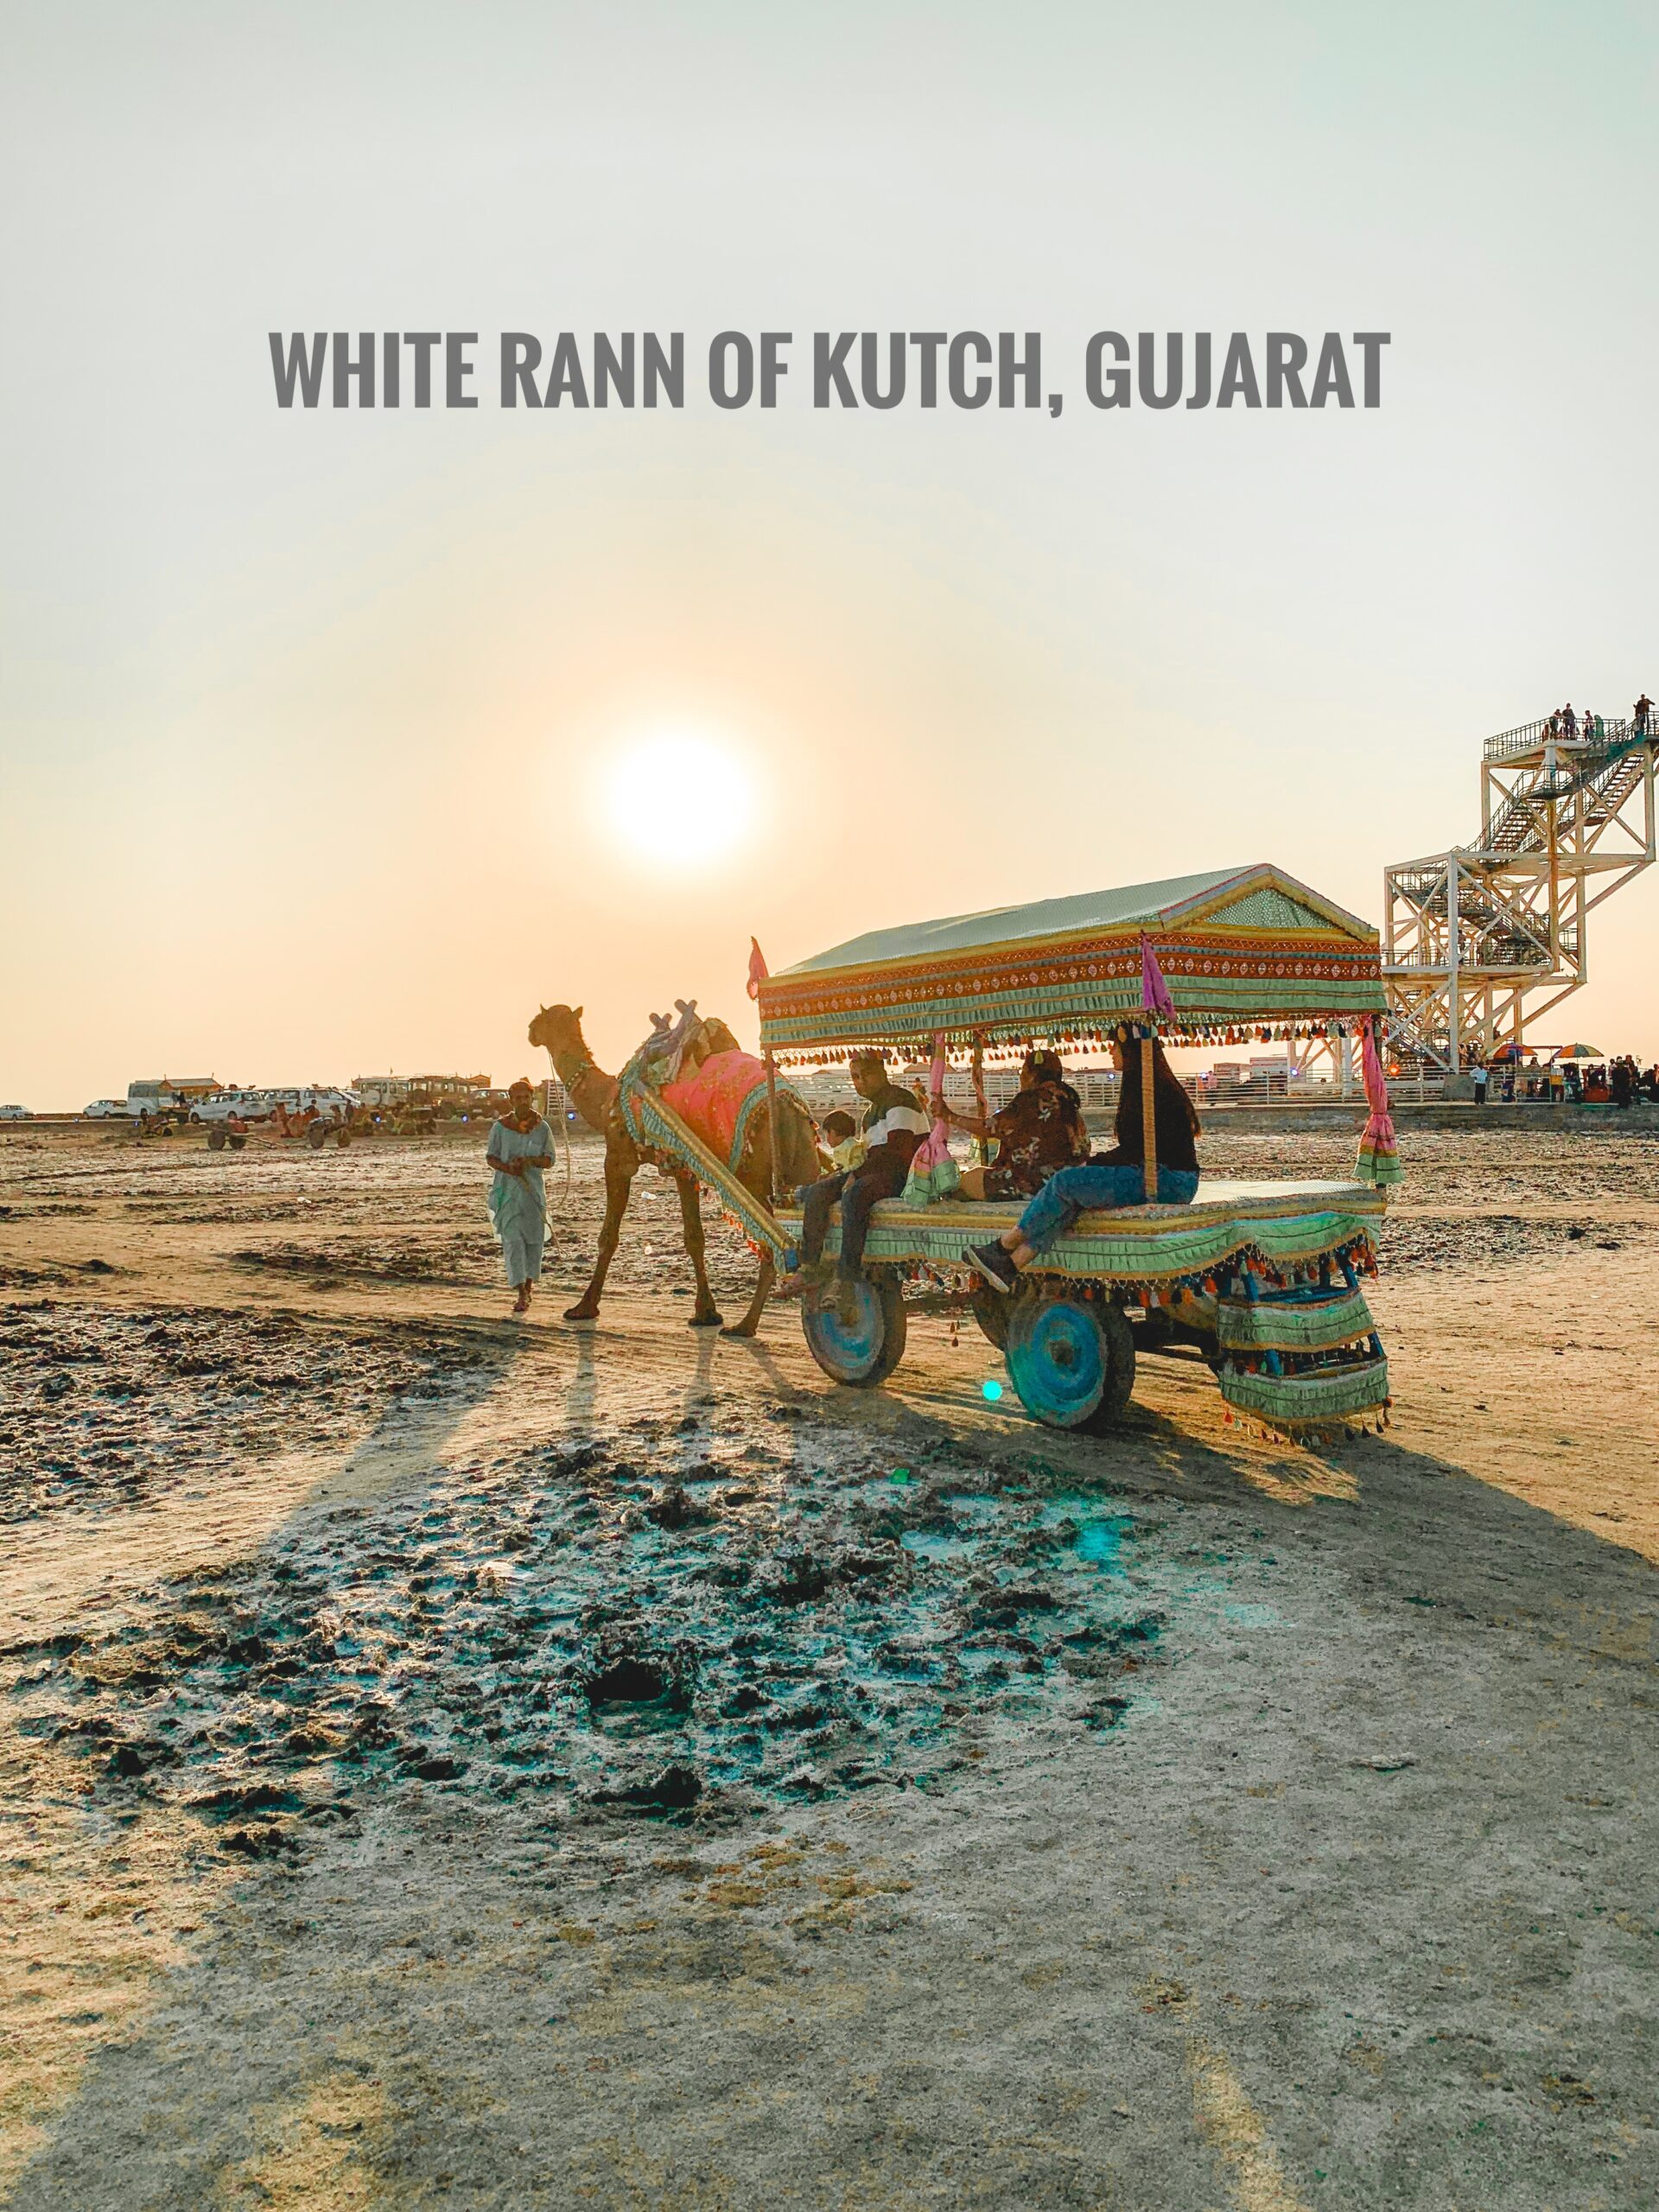 Should you visit the White Rann of Kutch at all?